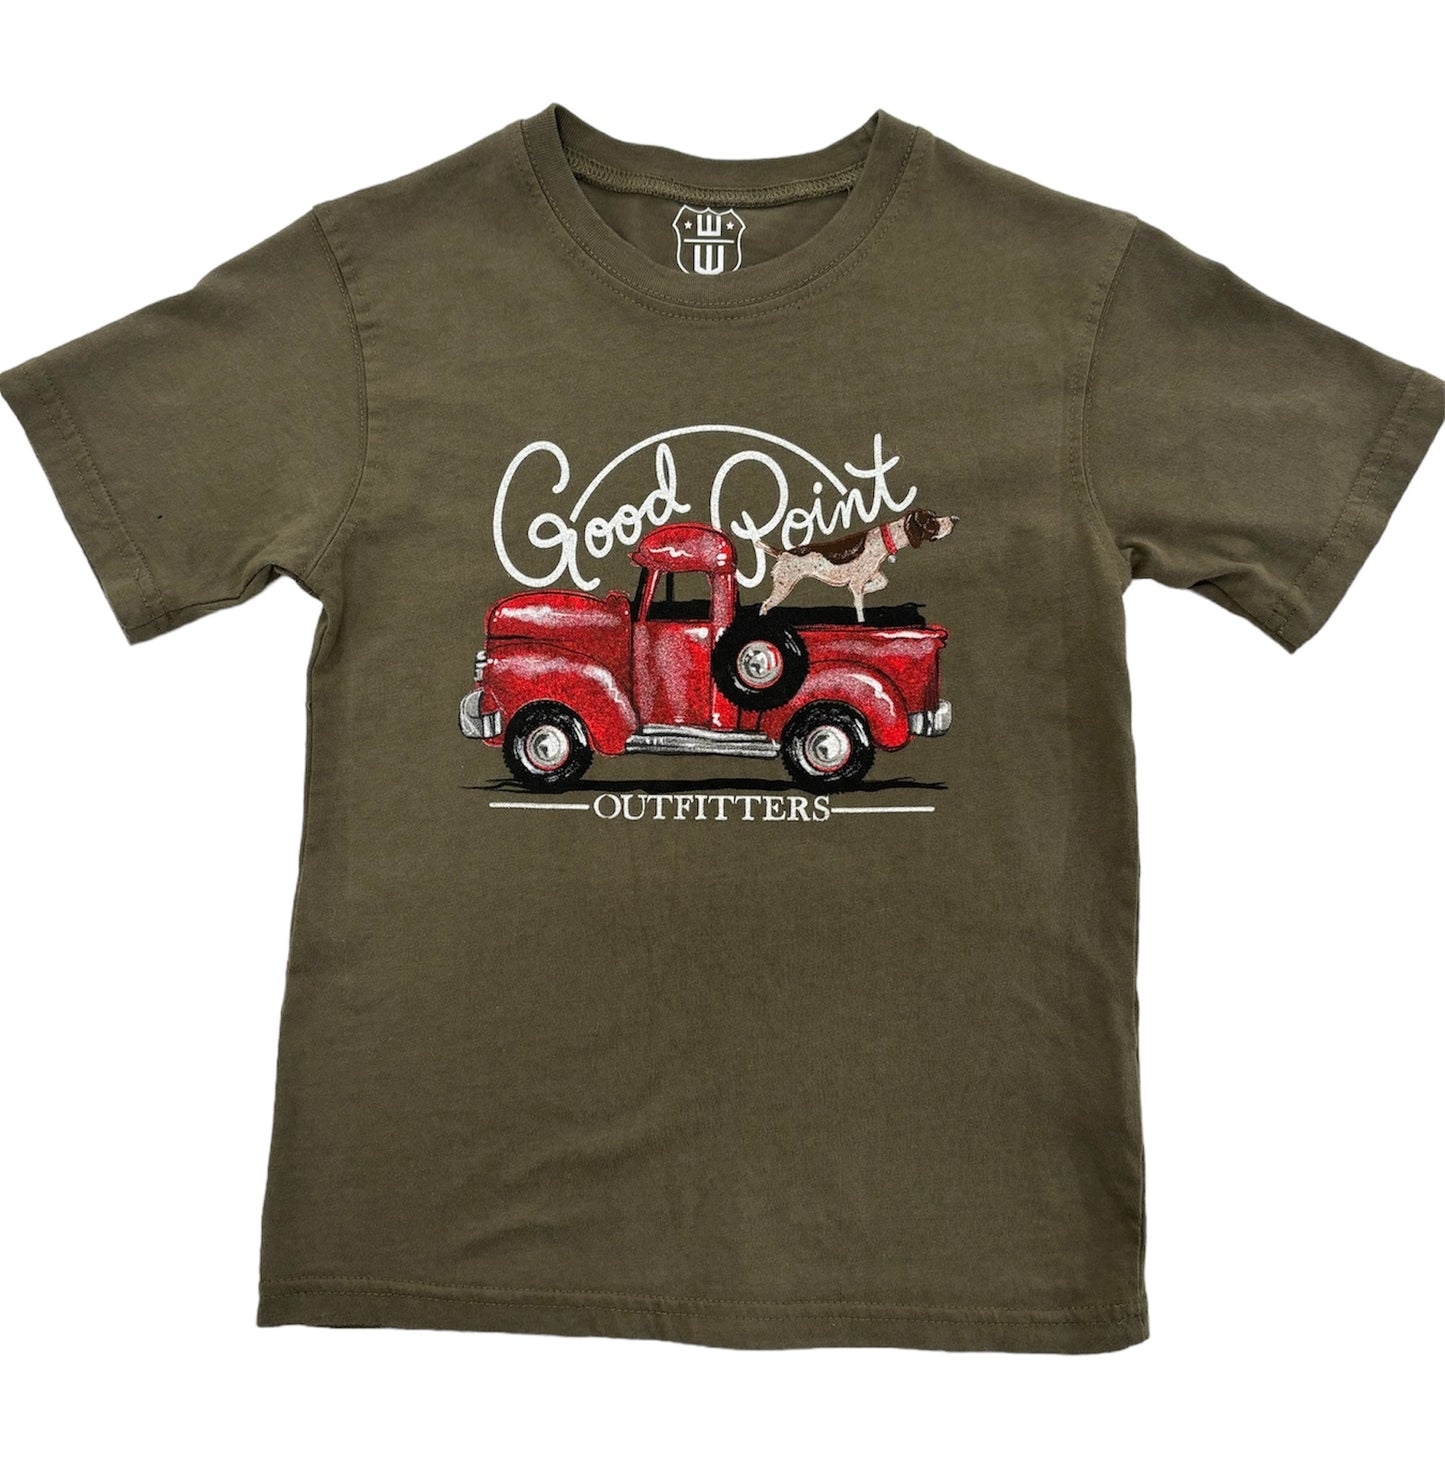 Wes and Willy Boys Good Point Truck Short Sleeve, Green